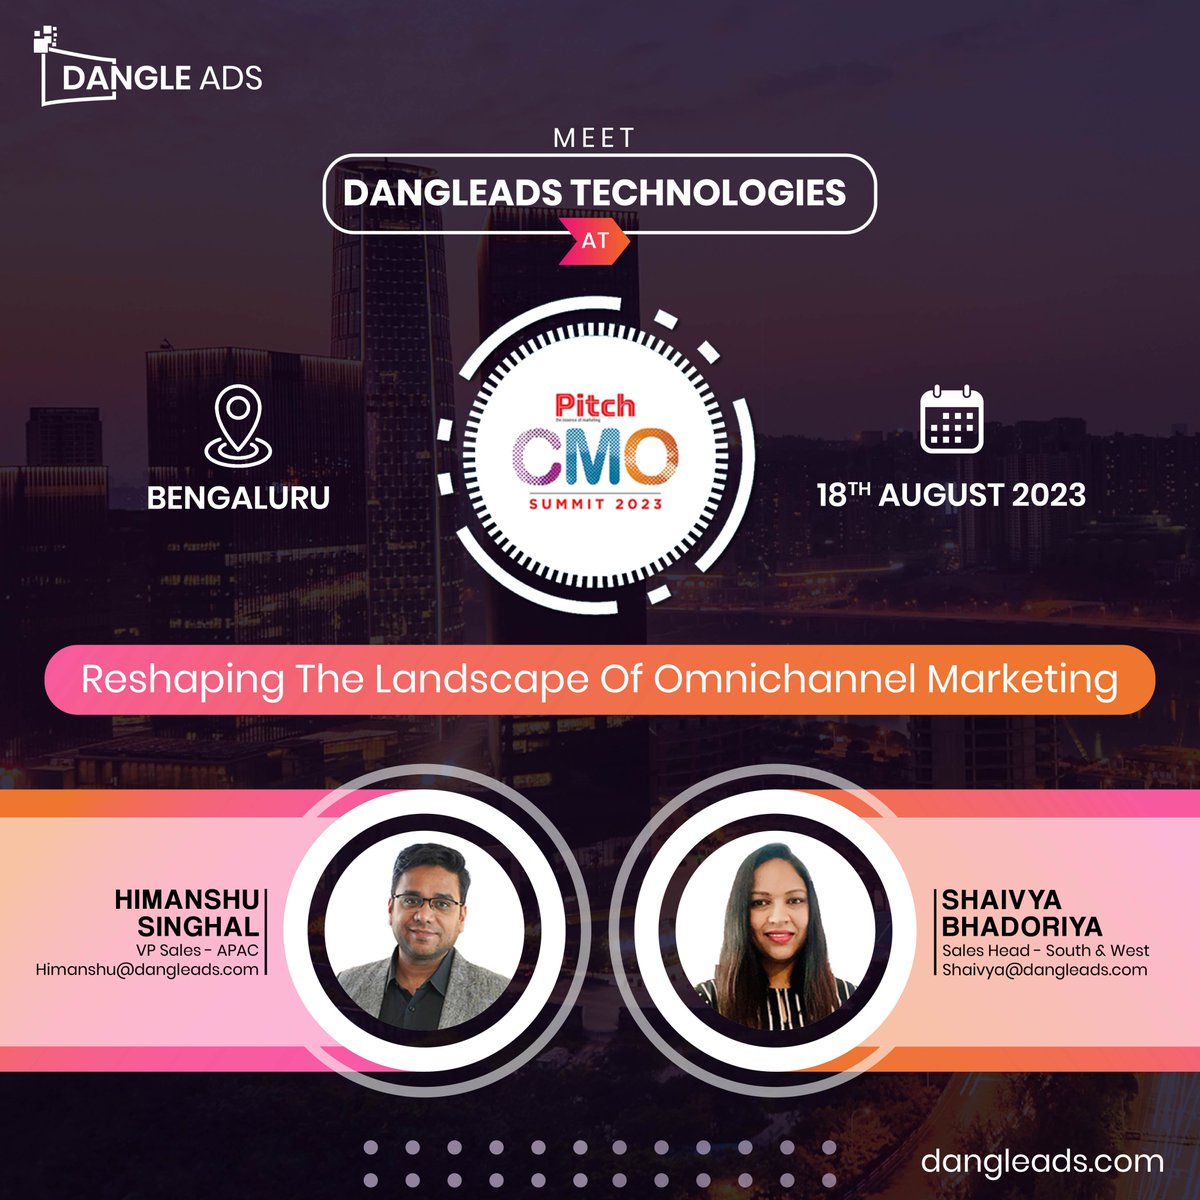 Meet Team DA at Pitch CMO Summit 2023.
We’re thrilled and looking forward to attending the event to meet industry experts and forge impactful partnerships!🚀
To connect or schedule a meeting, reach out to us at sales@dangleads.com 

 #marketingevent #PitchCMO #TeamDA